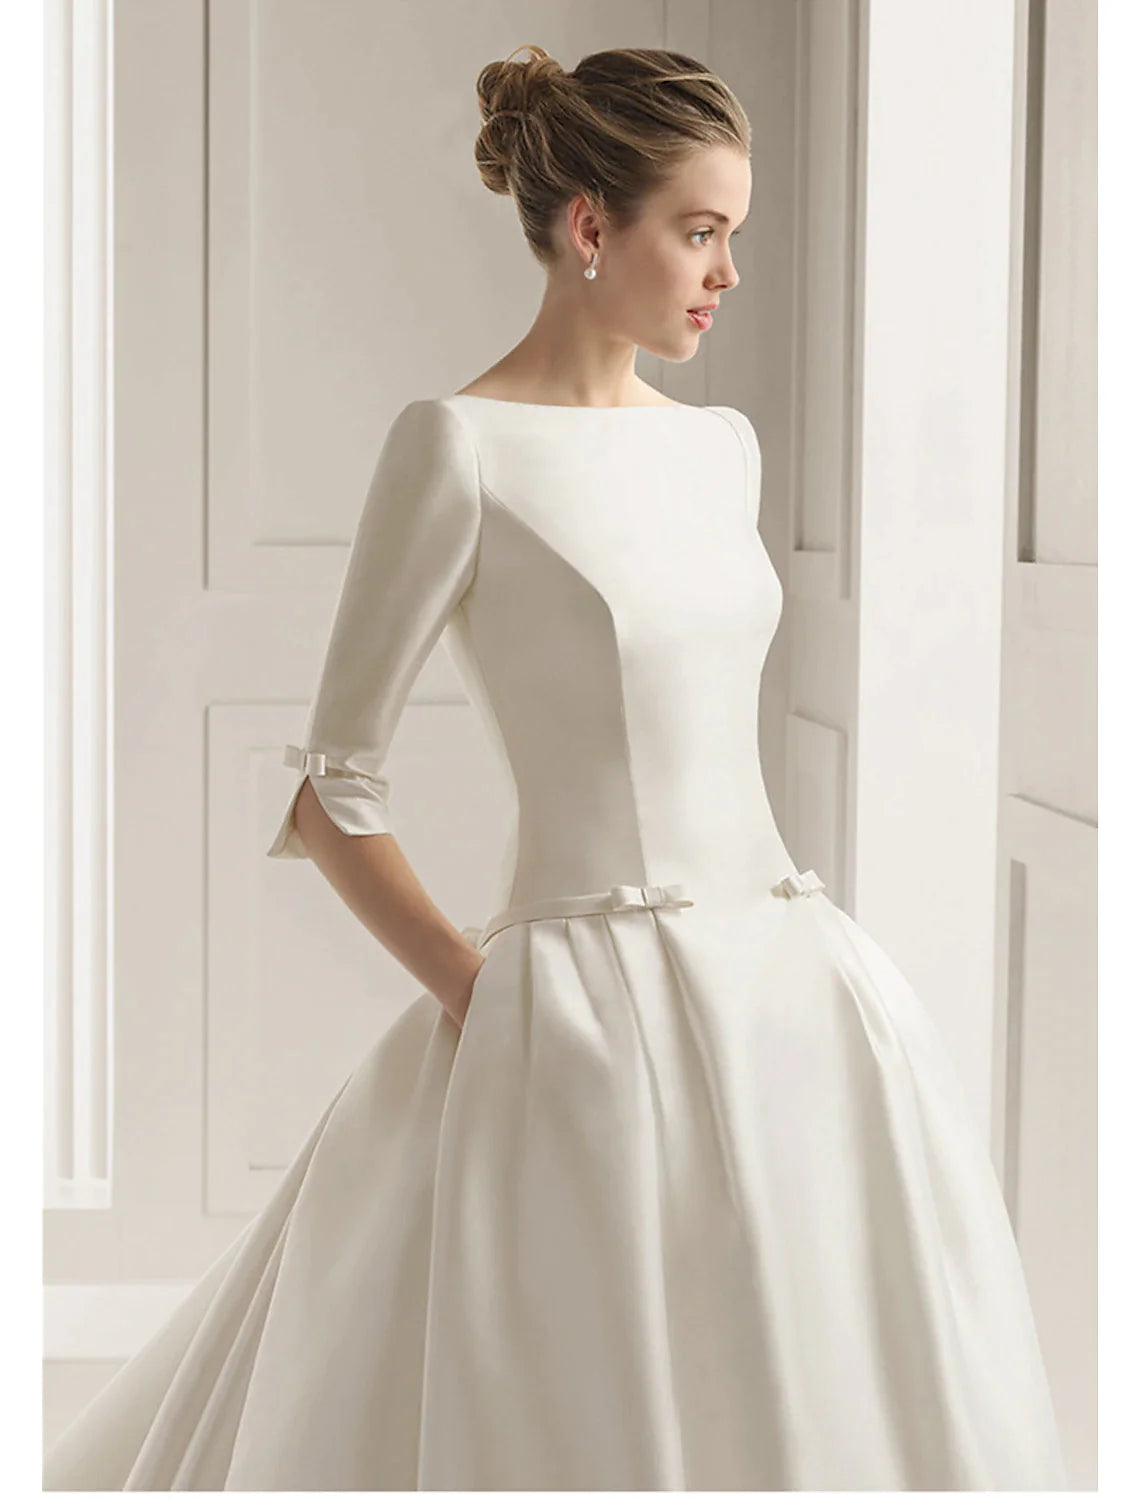 Engagement Formal Wedding Dresses A-Line Scoop Neck Half Sleeve Court Train Satin Bridal Gowns With Bow(s) Pleats